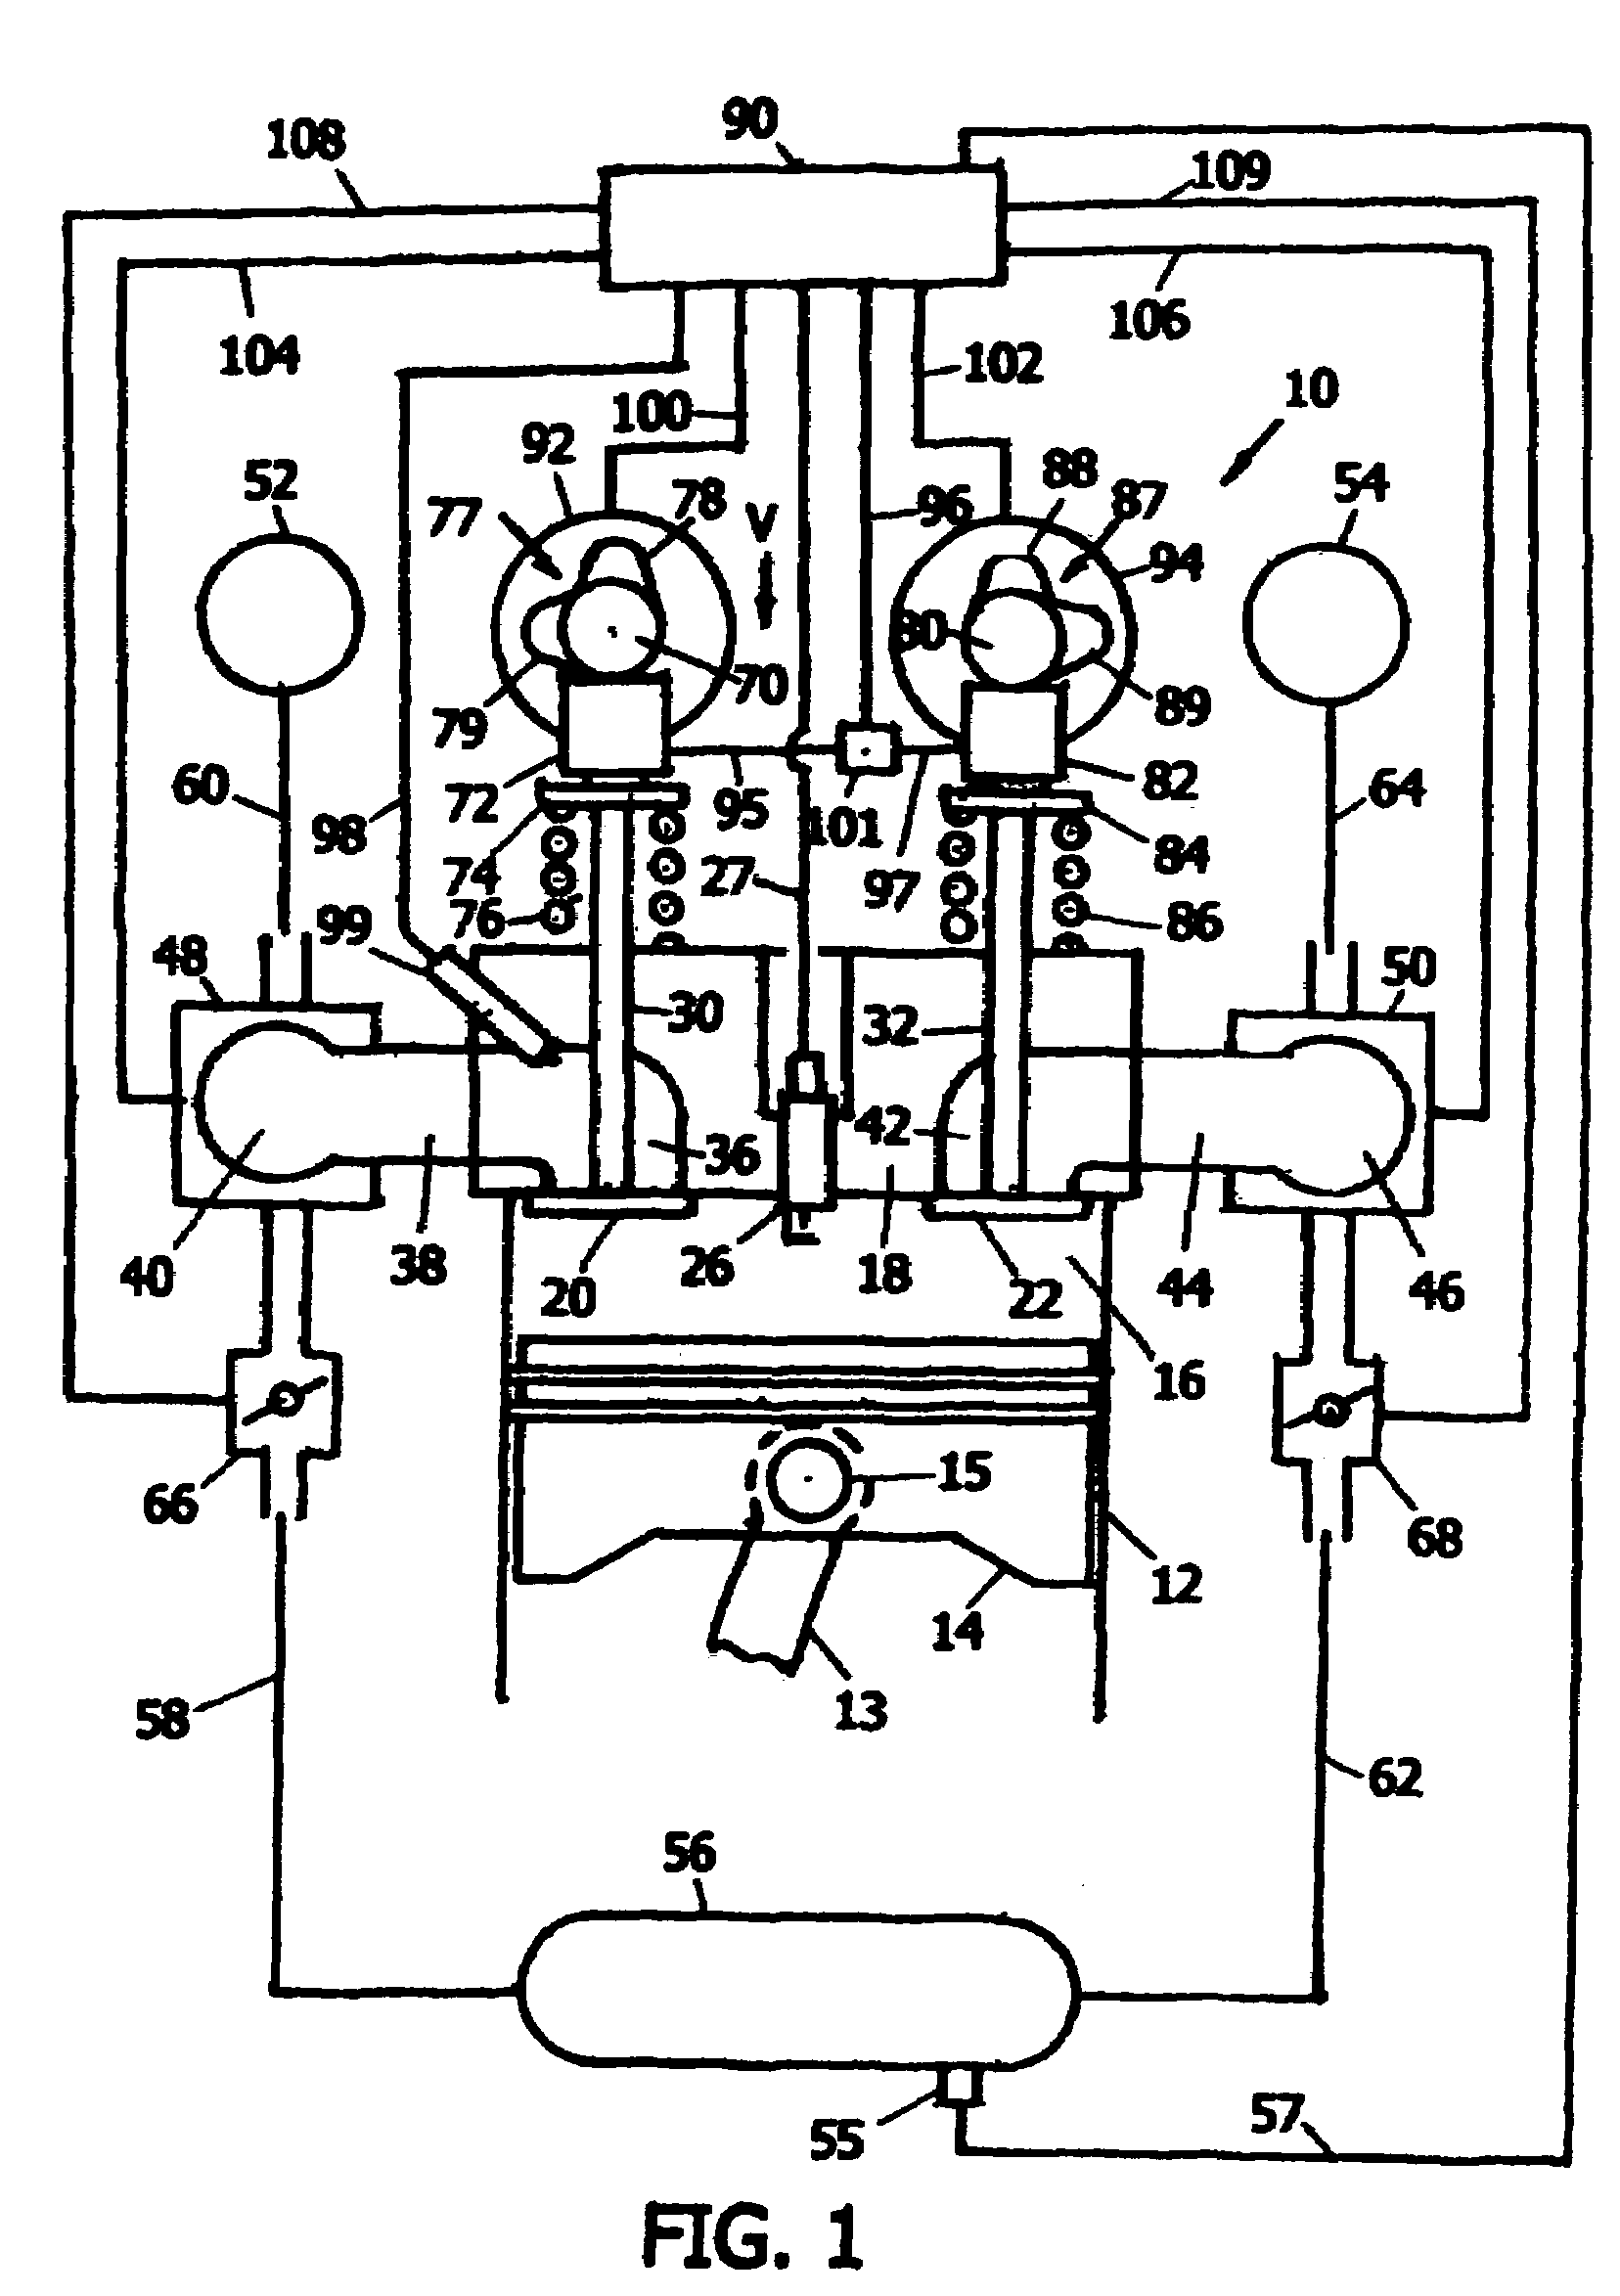 Operating an air-hybrid vehicle with camshaft-driven engine valves